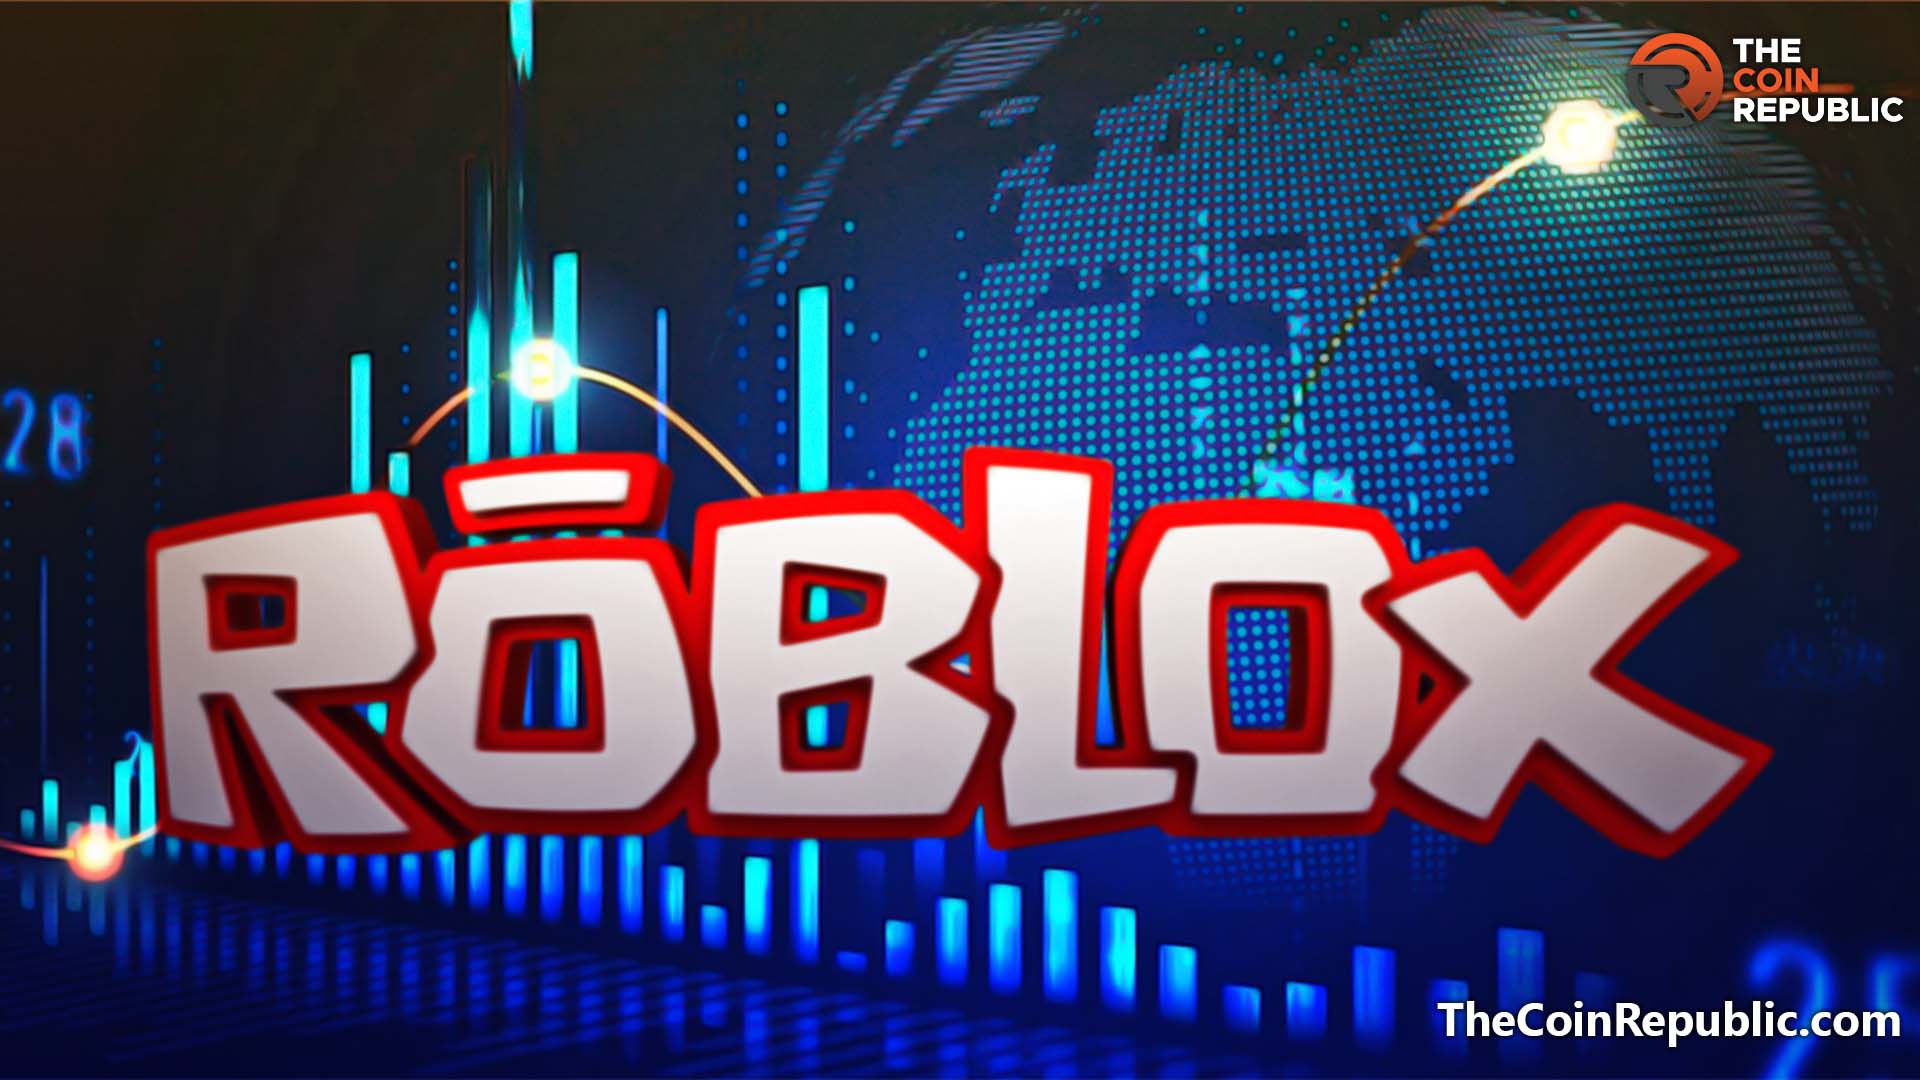 Guest Post by Thecoinrepublic.com: Roblox Stock: Will RBLX Stock